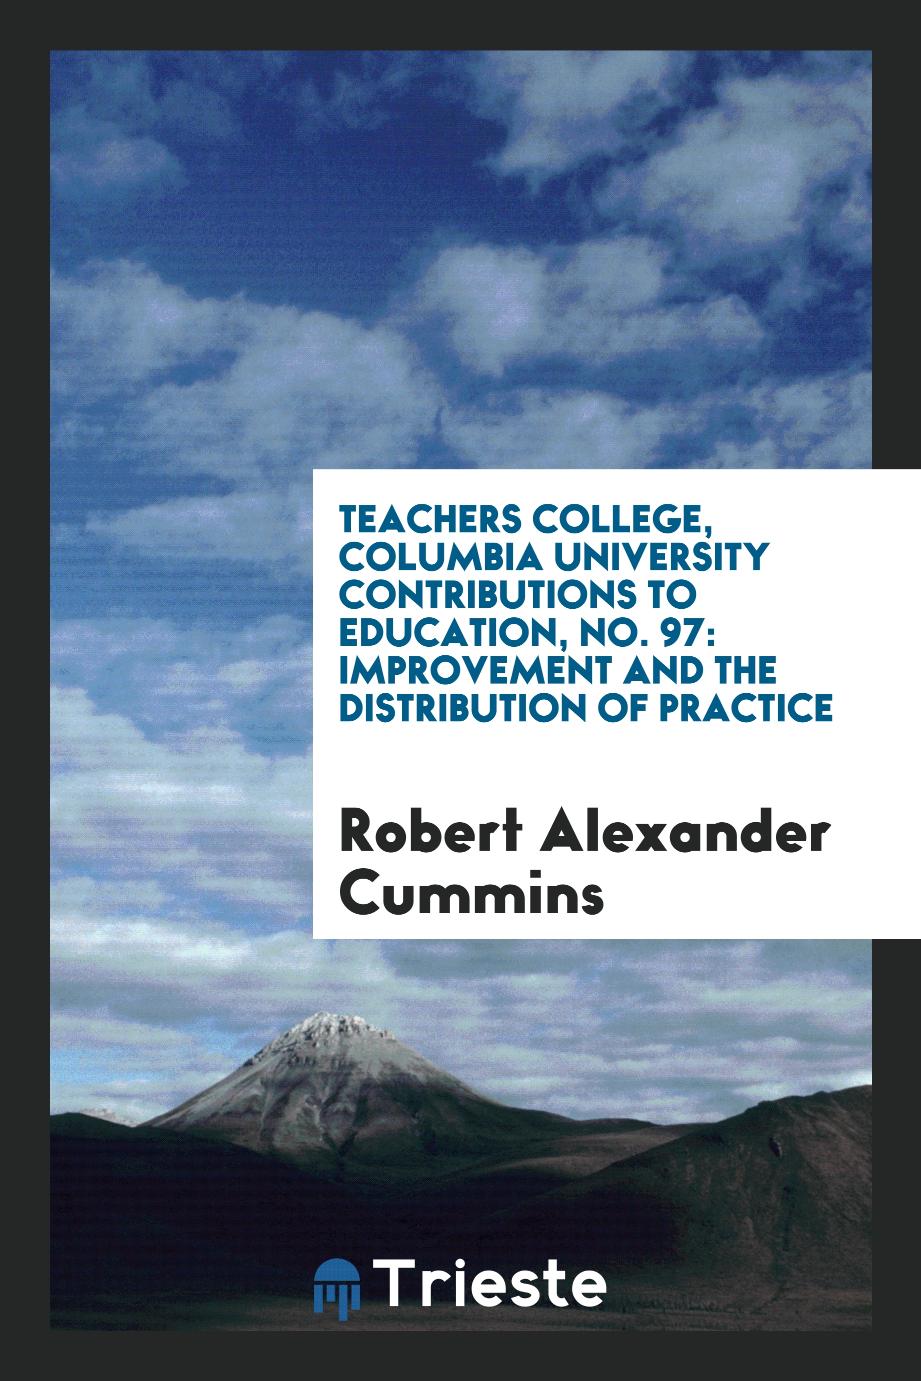 Teachers College, Columbia University Contributions to Education, No. 97: Improvement and the Distribution of Practice